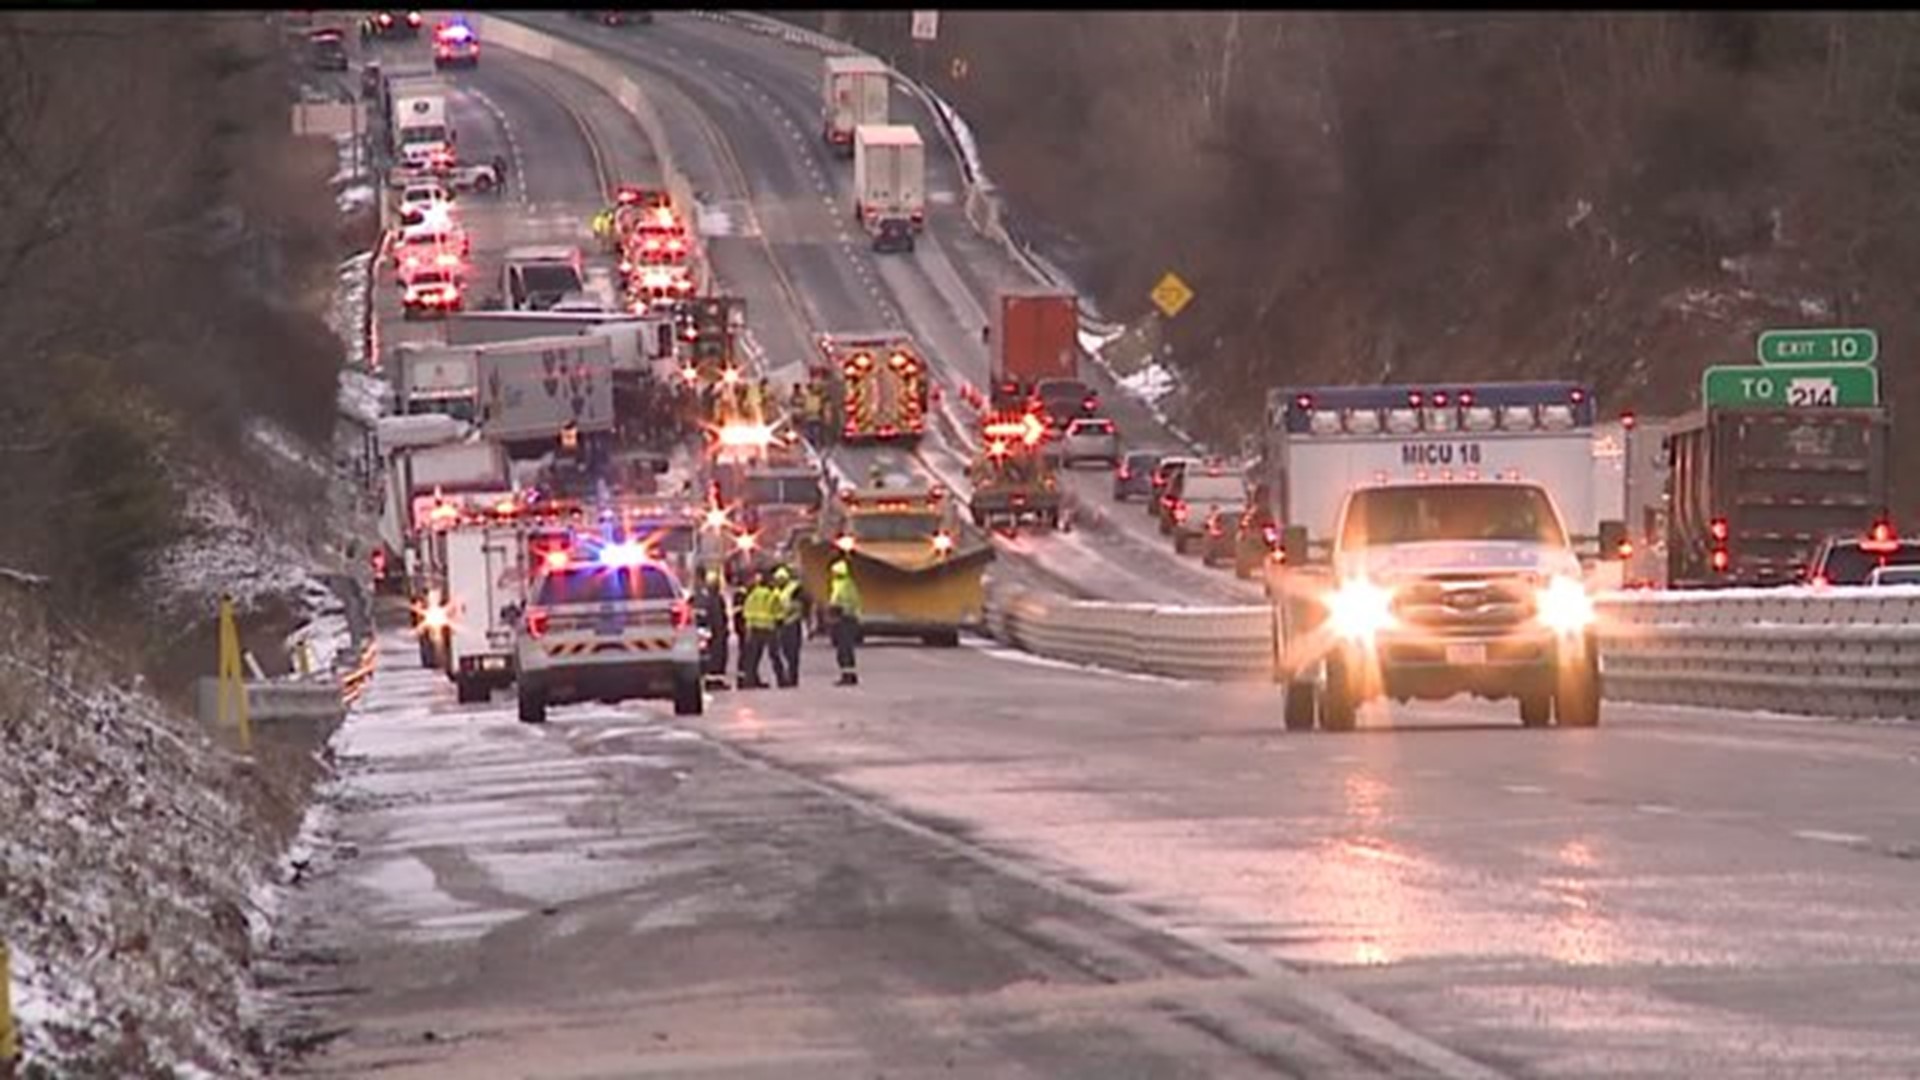 Drivers stuck in traffic react to crash on I-83 after snow squall